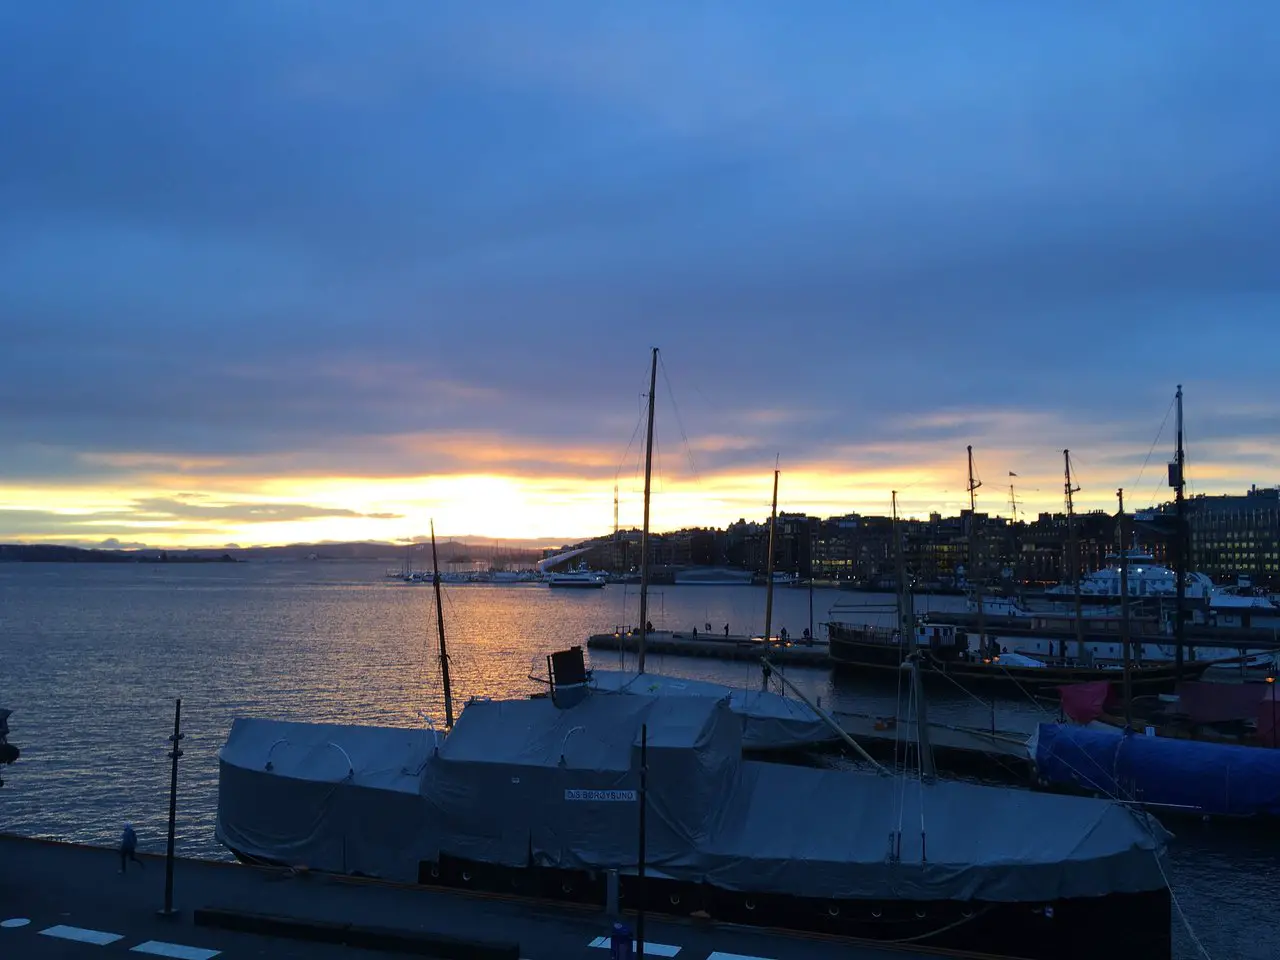 View of the sunset on a February night over the Oslo Fjord in Norway